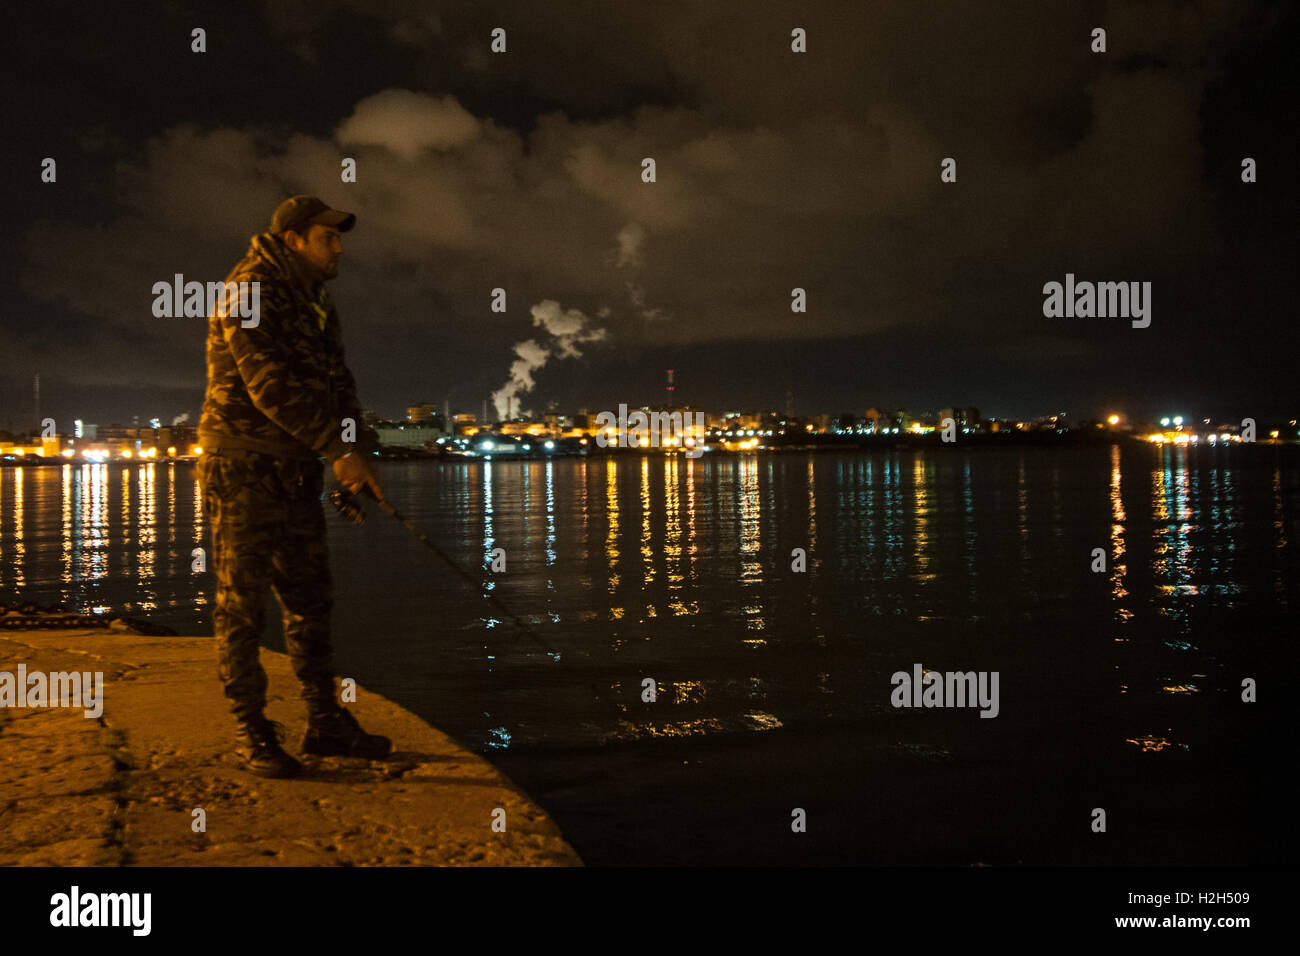 Citizen of Taranto fishing with the pollution on the background, south of Italy. Stock Photo